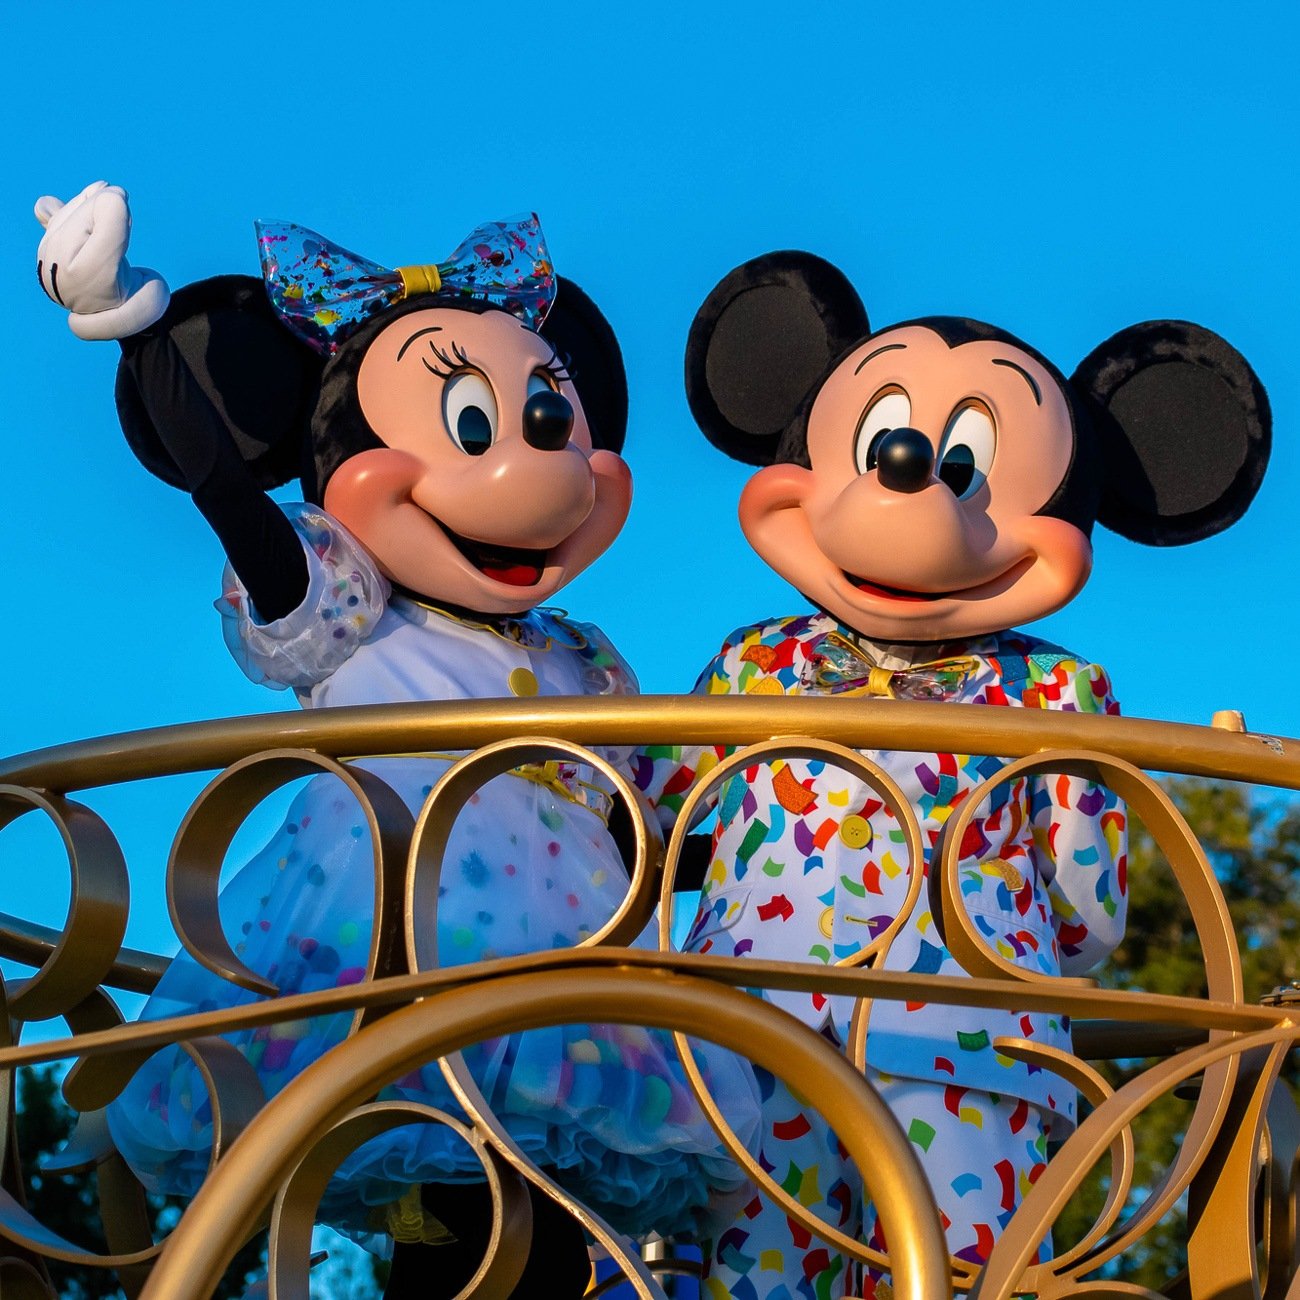 Romantic Things for Couples to Do at Disneyland